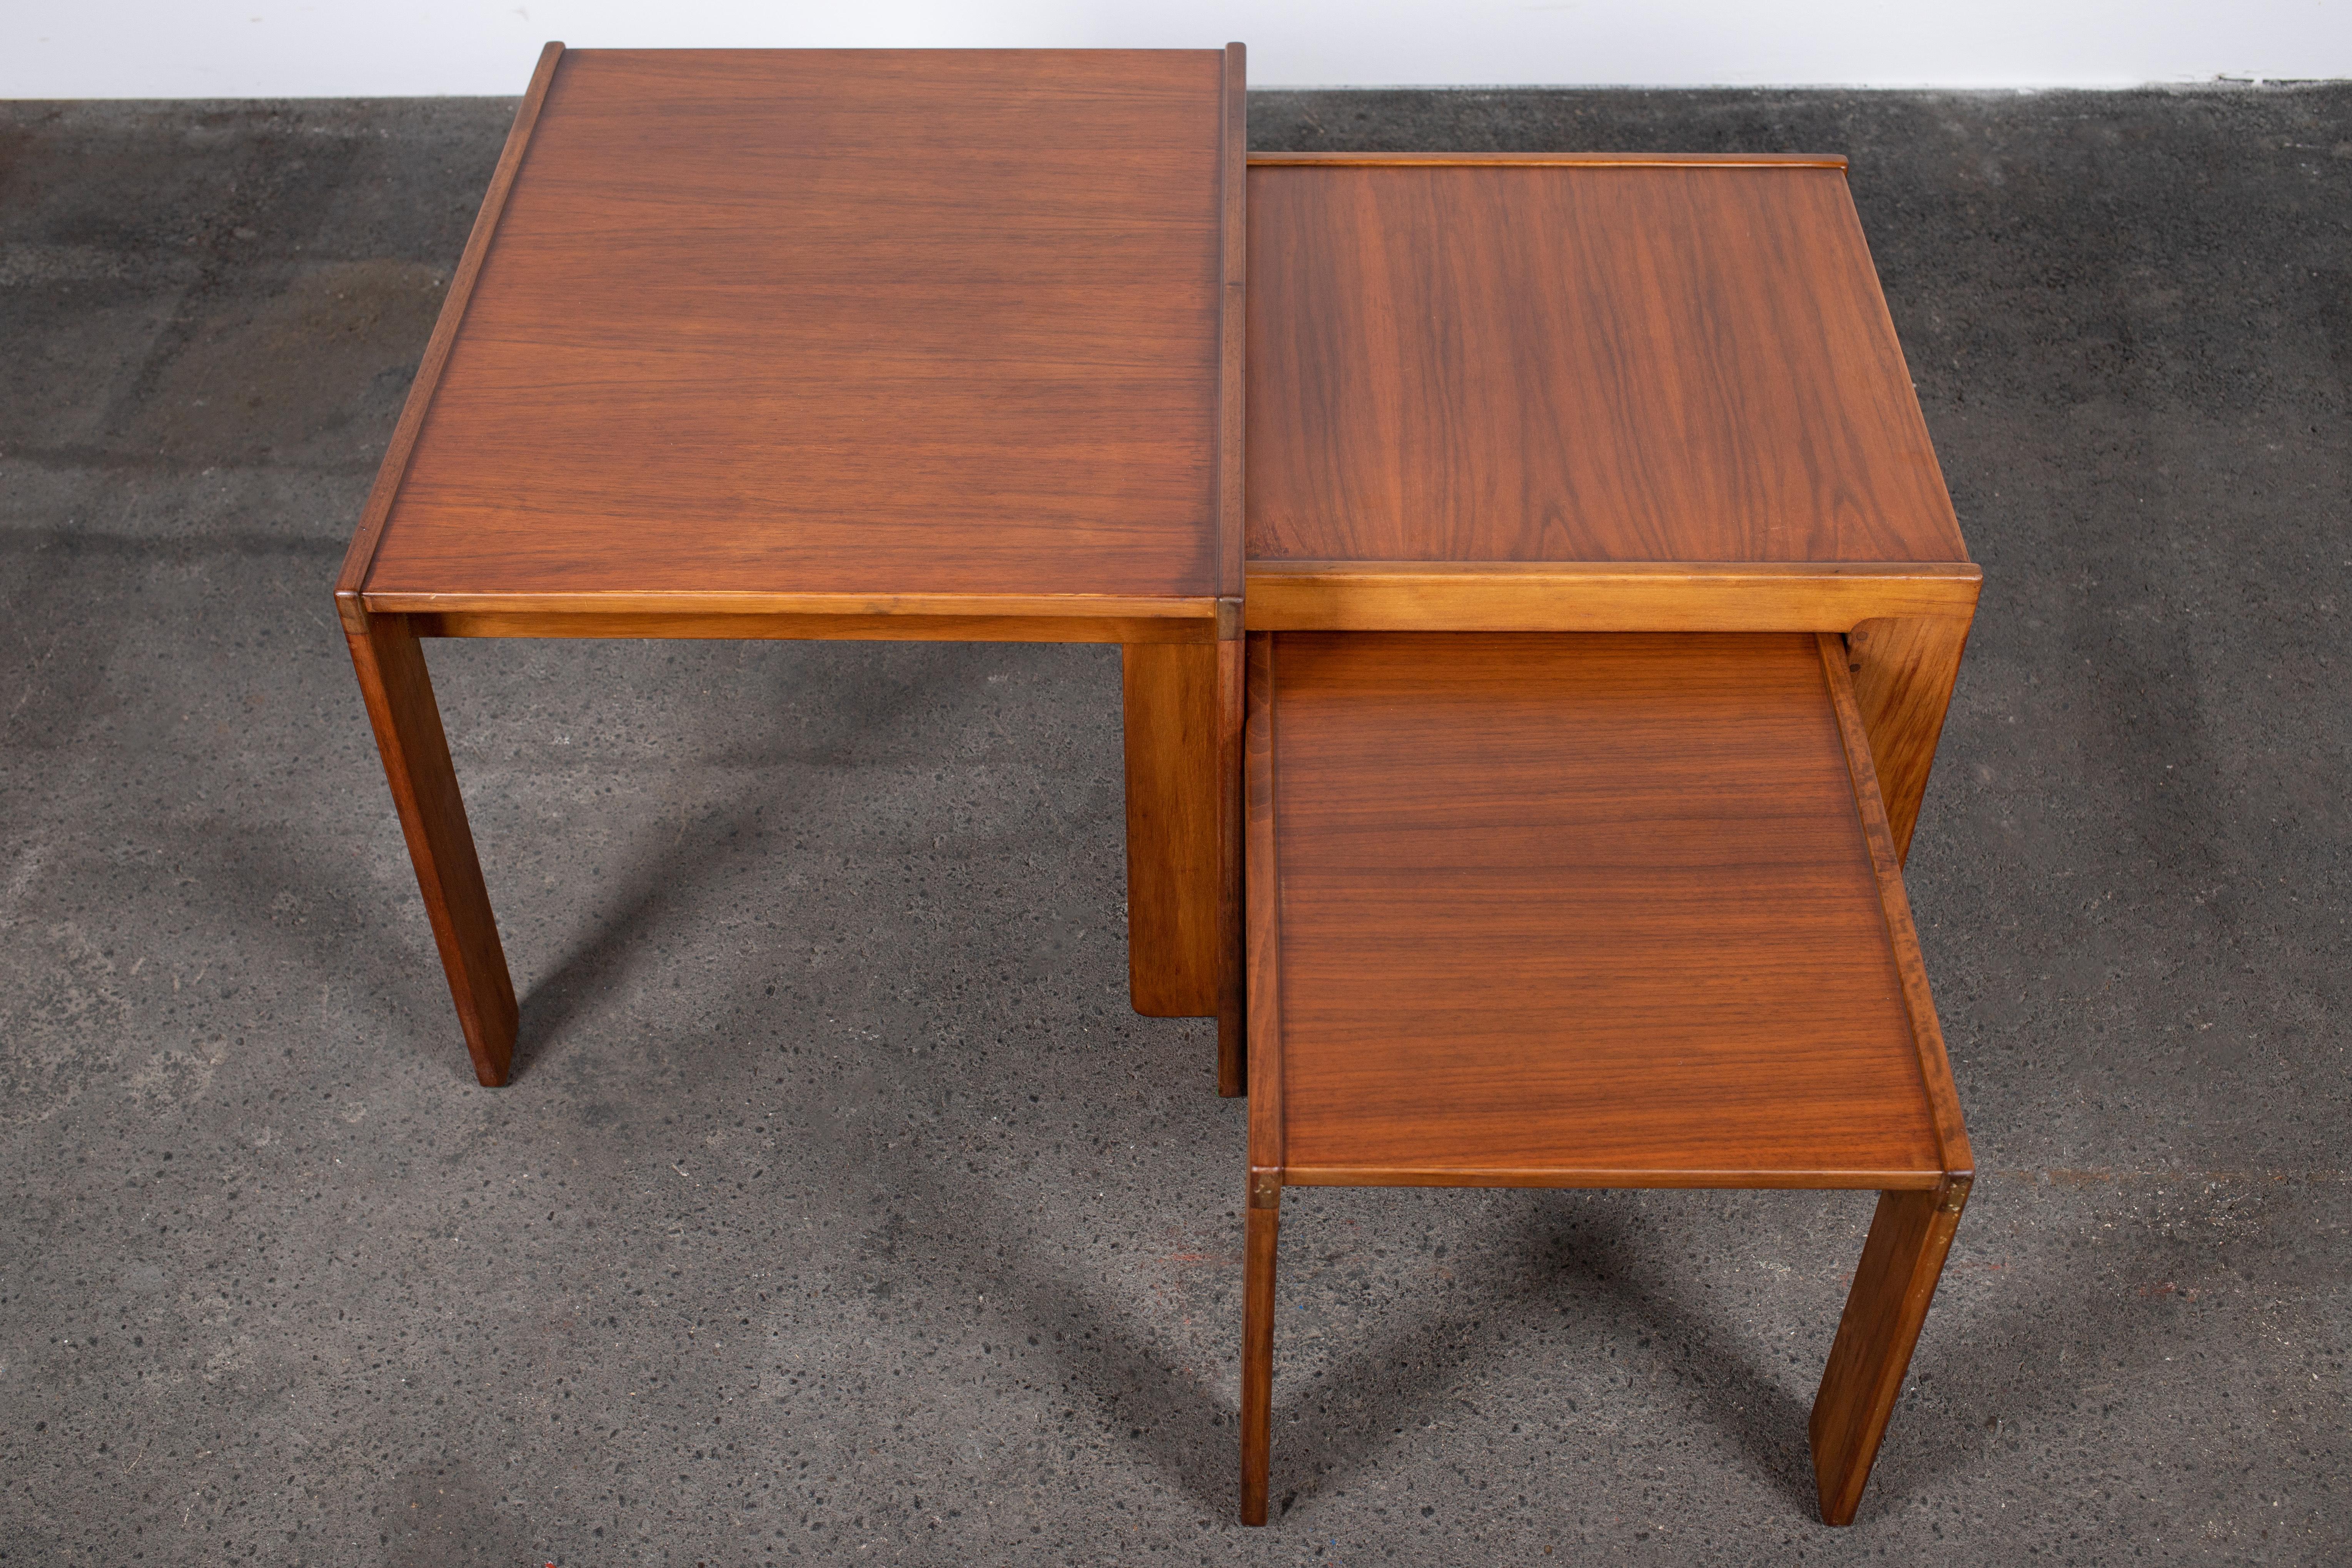 Set of 3 Mid Century Modern nesting tables in walnut by Afra & Tobia Scarpa for Cassina, 1960s.

The Scarpa genius is found in abundance within the details of this set. Not only the elegant way that they nest perfectly together or in the myriad of